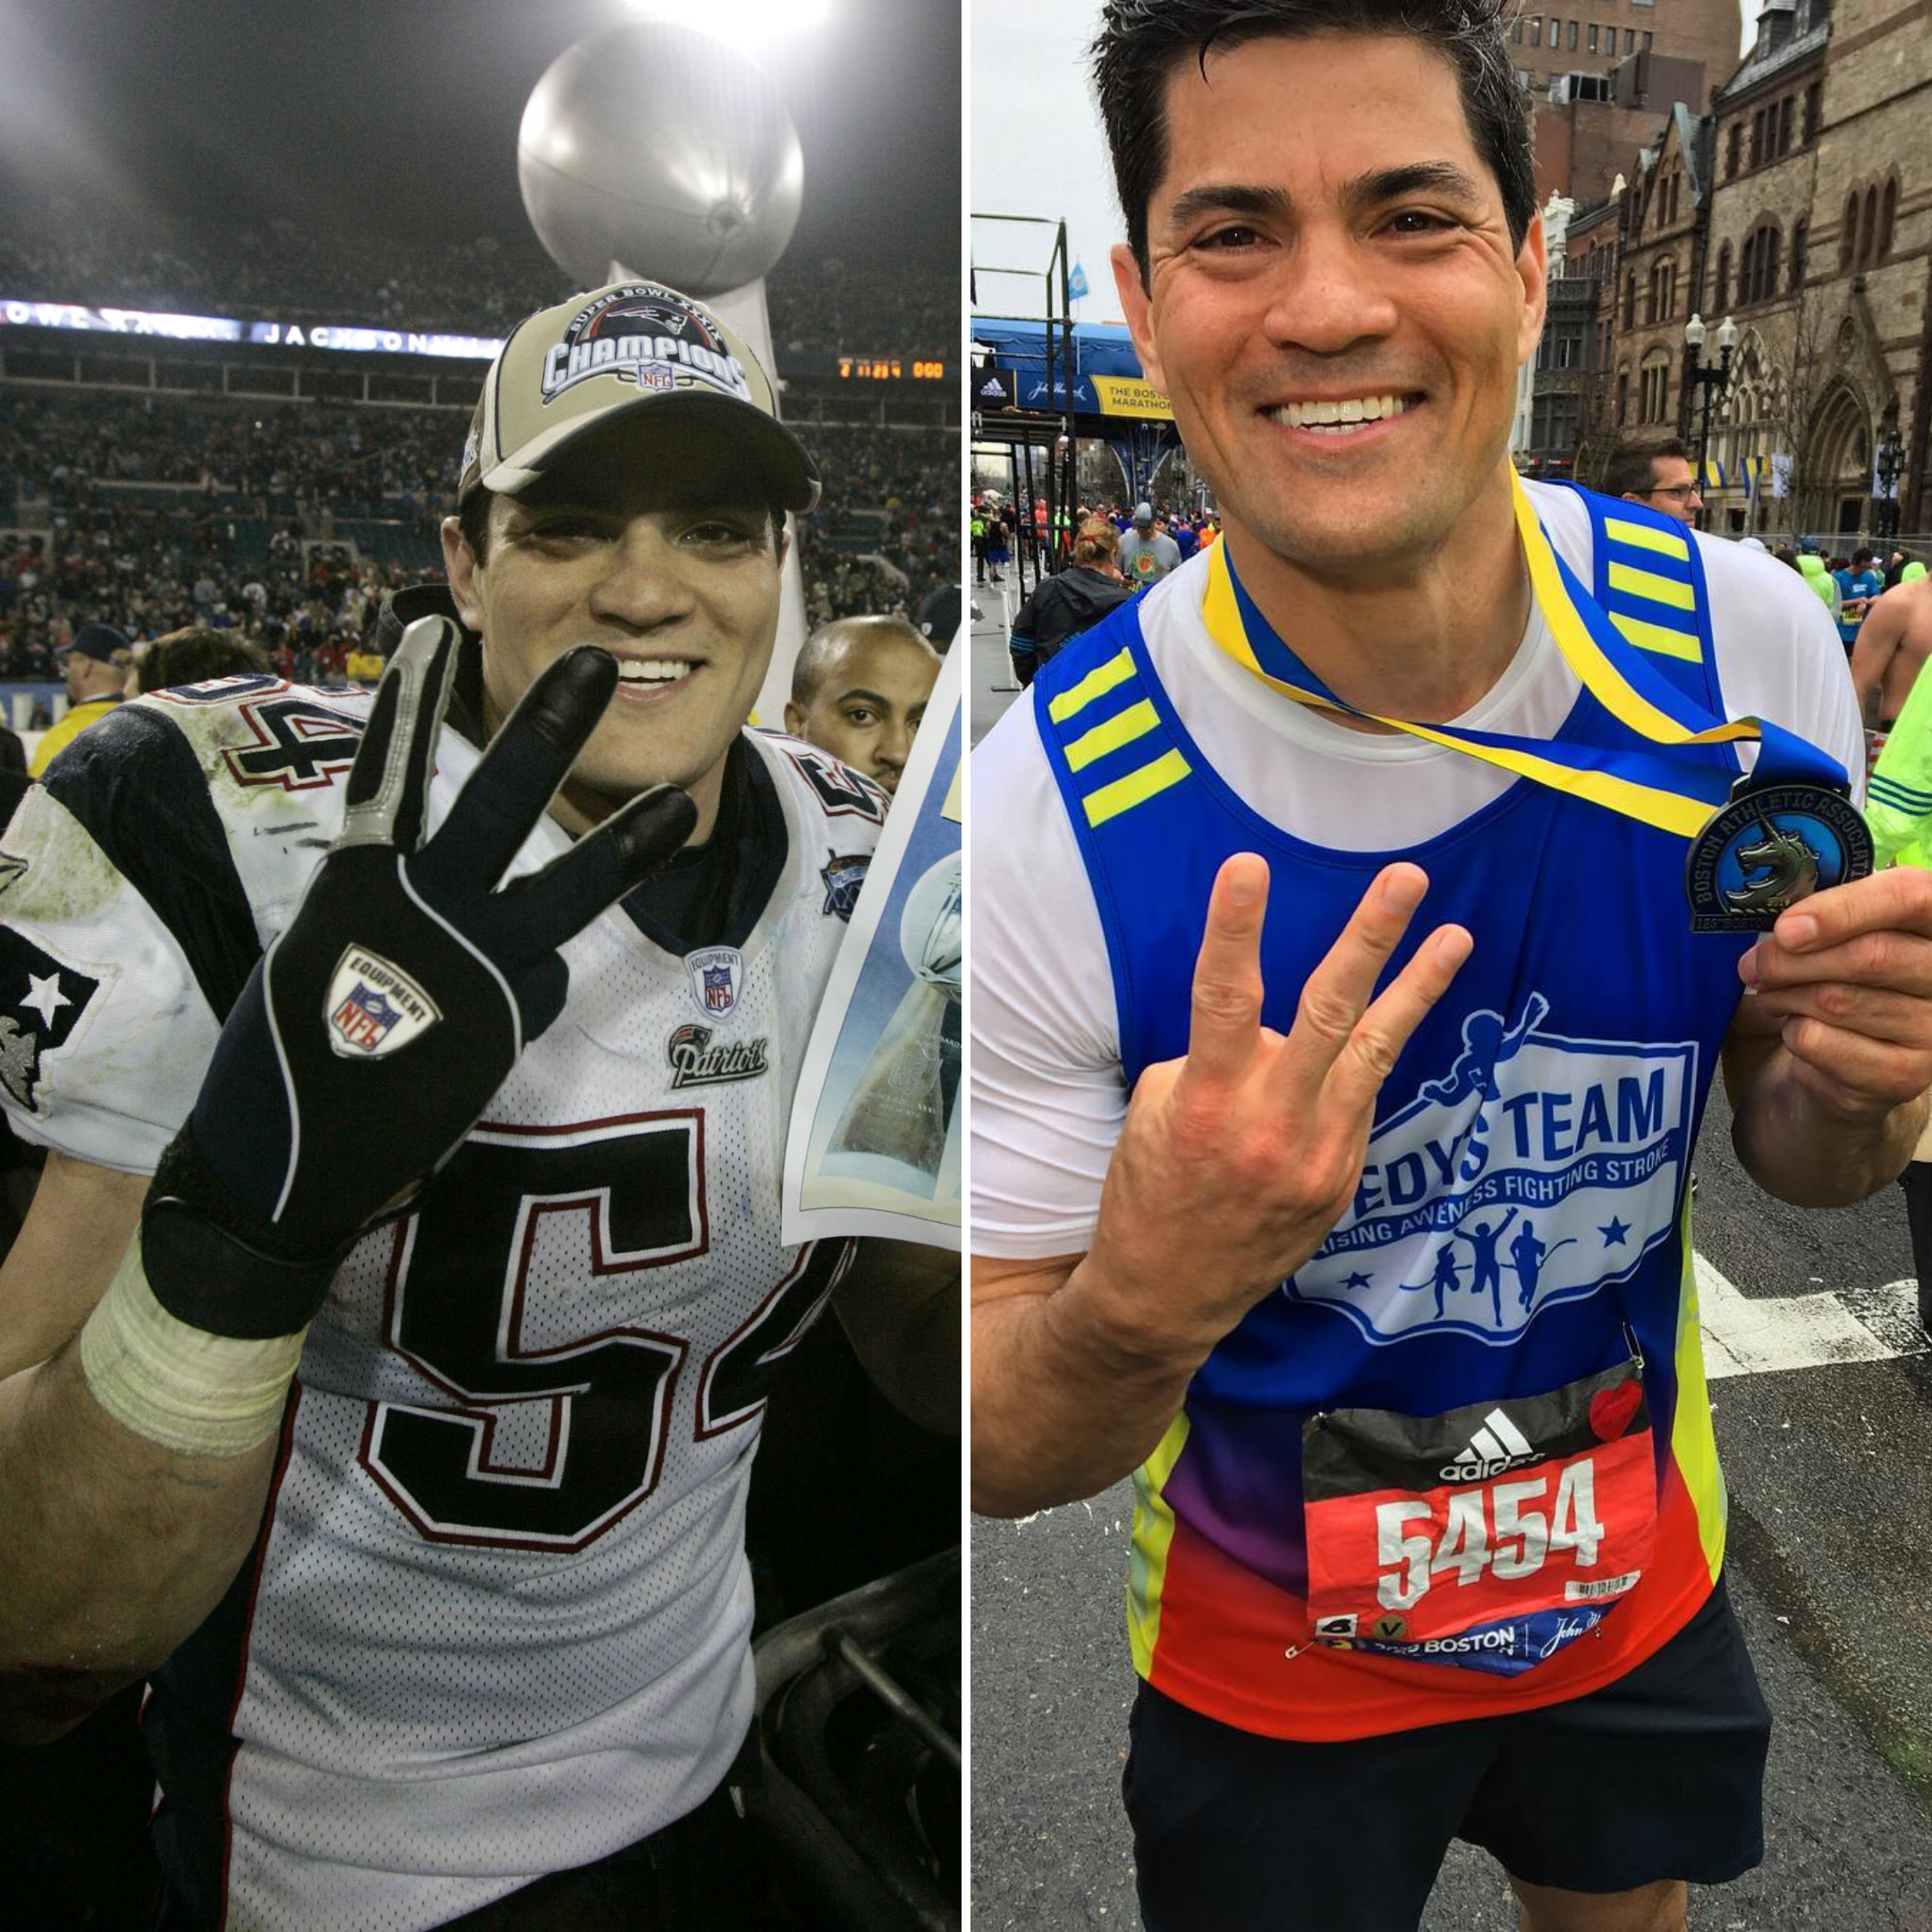 Tedy holds up 3 fingers after winning his third Super Bowl with the Patriots and again after getting his 3rd Boston Marathon medal.